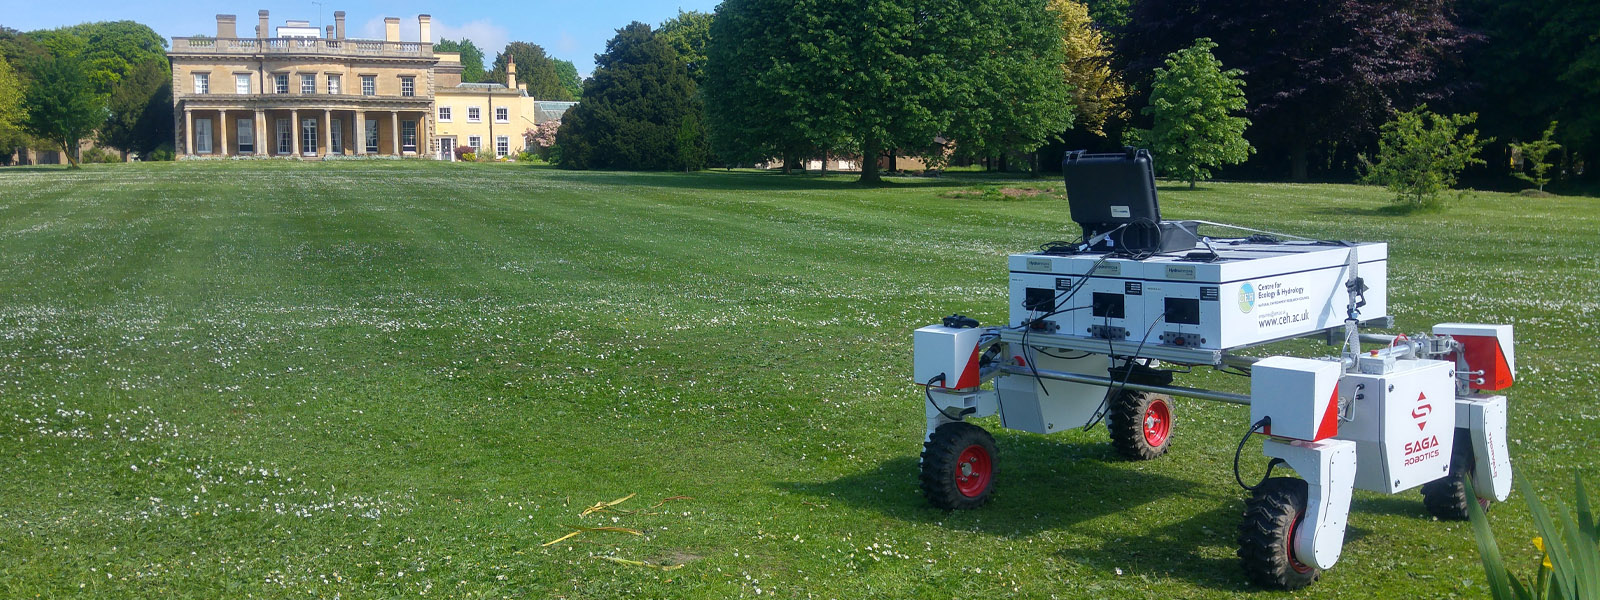 Thorvald robot on lawn at Riseholme campus